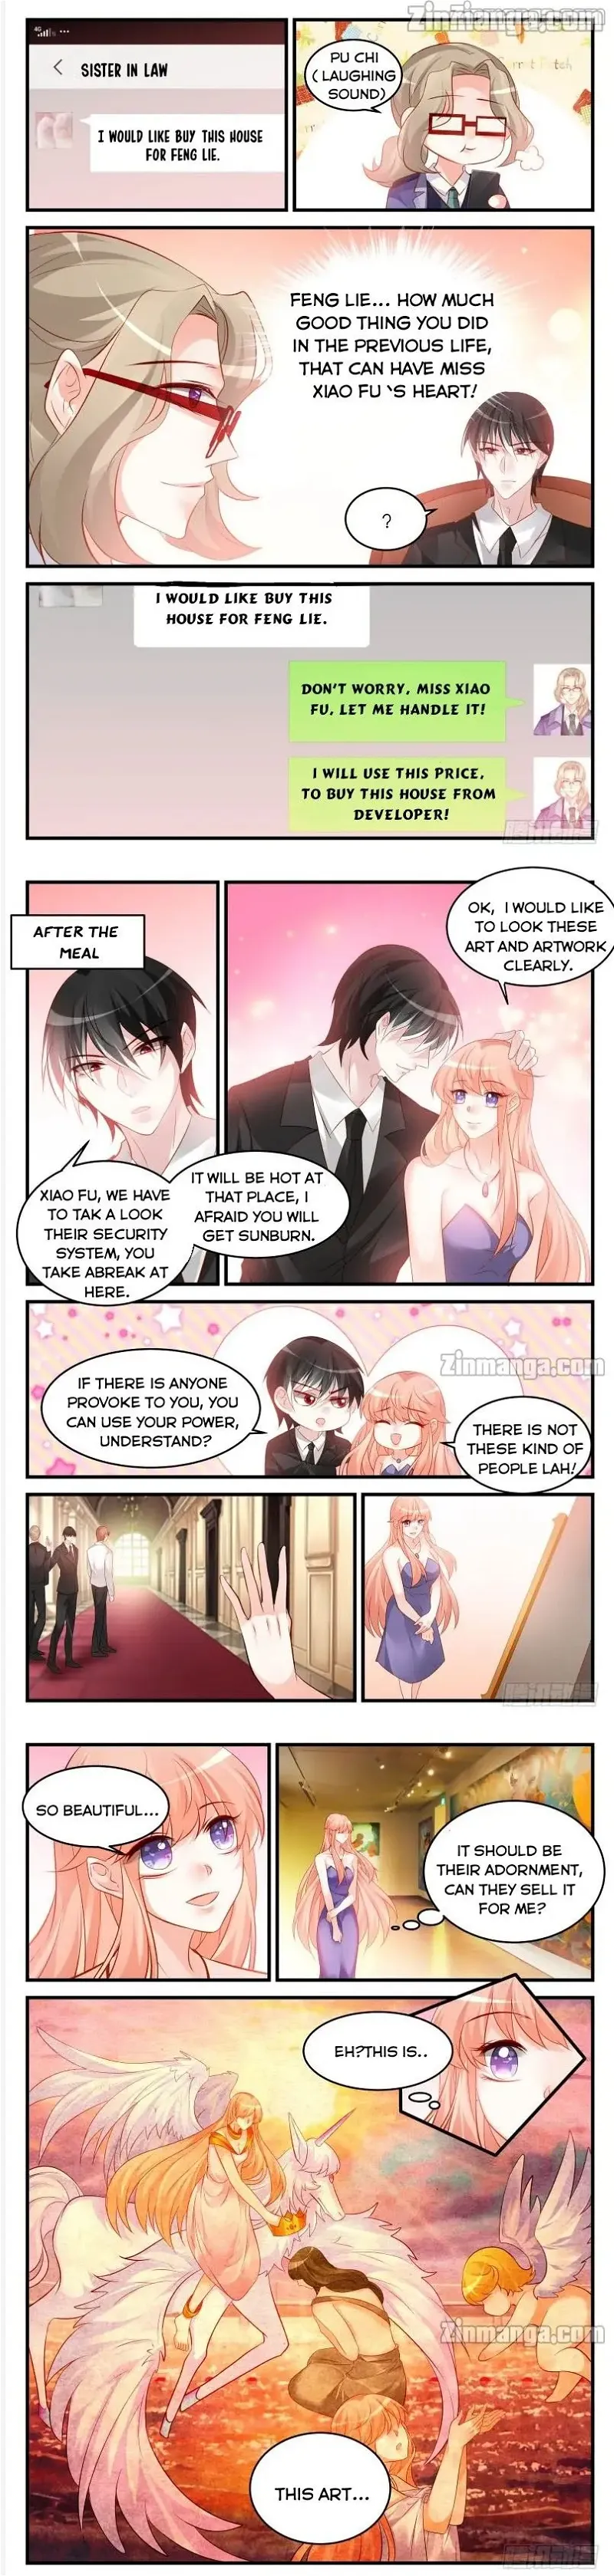 Teach the devil husband Chapter 228 page 1